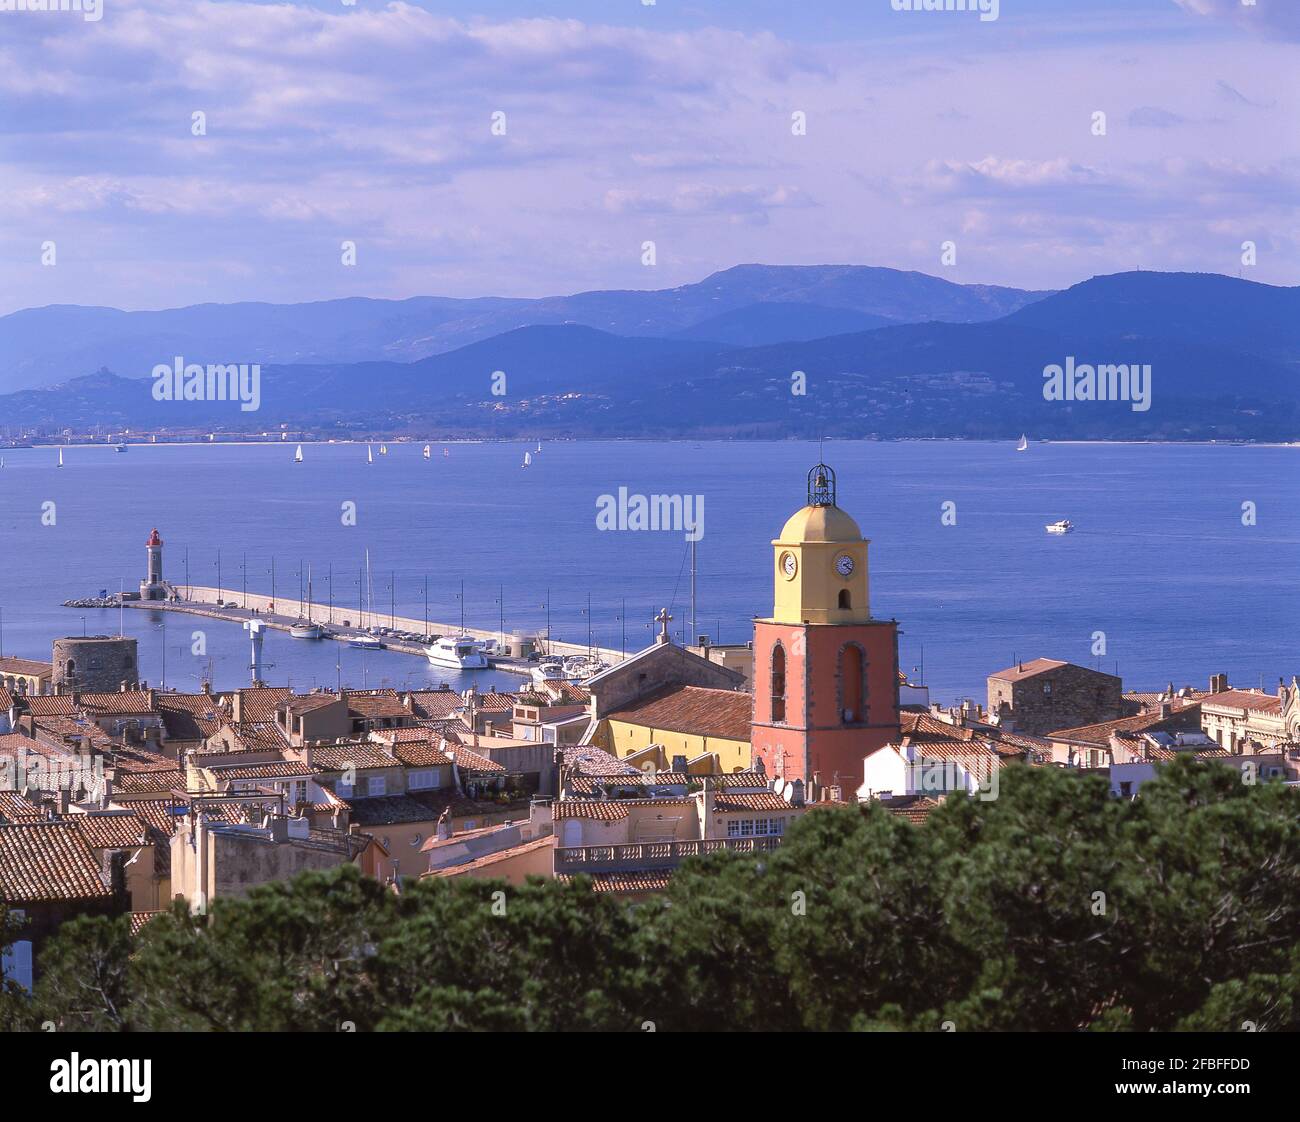 Old town and harbour from Fort, Saint-Tropez, Var, Provence-Alpes-Côte d'Azur, France Stock Photo